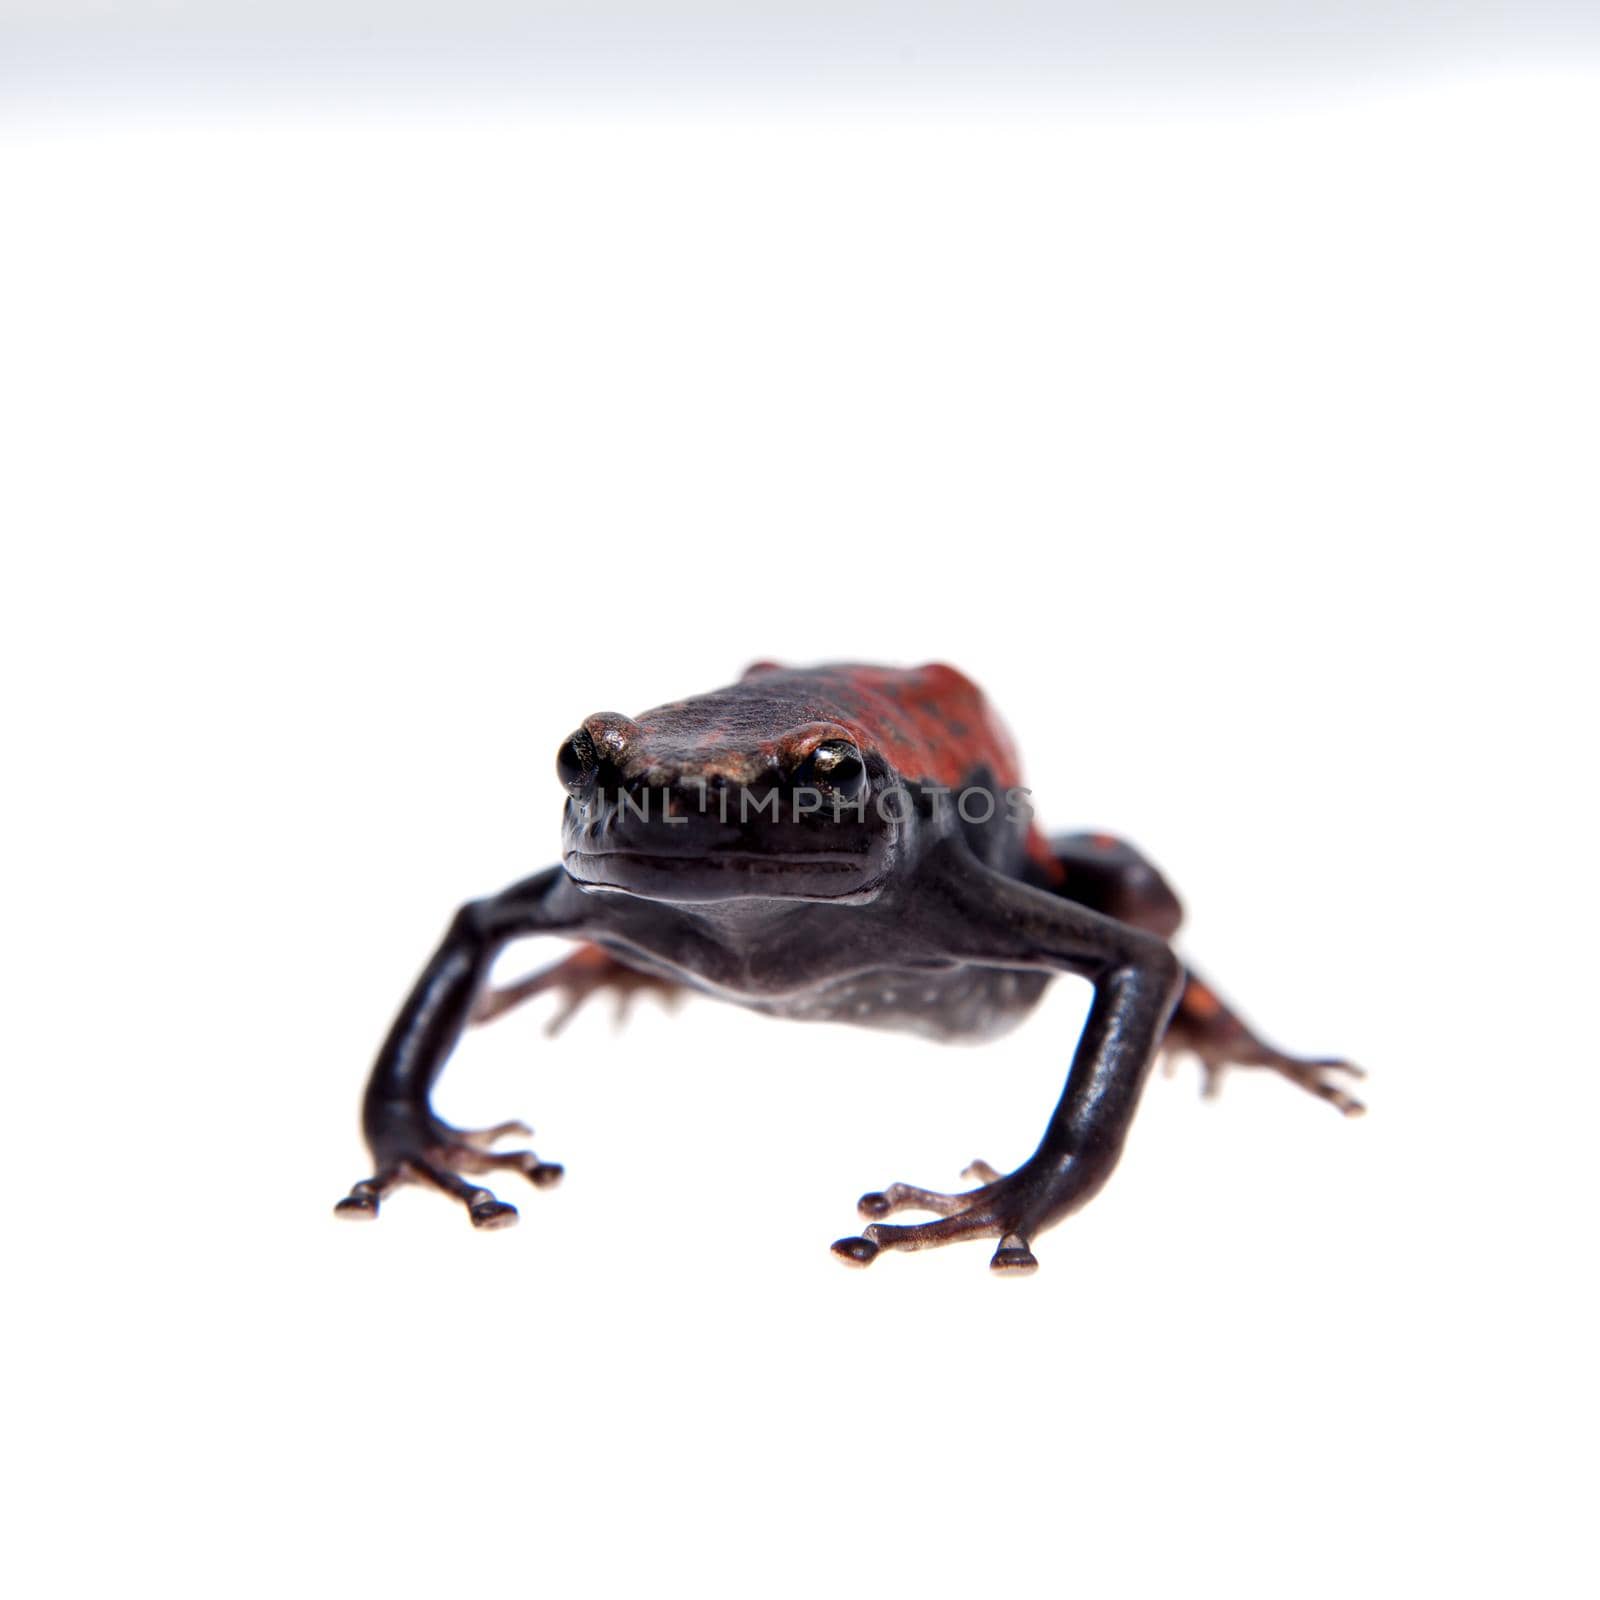 Accra snake-necked frog, Phrynomantis microps, red rubber frog or West African rubber frog isolated on white background